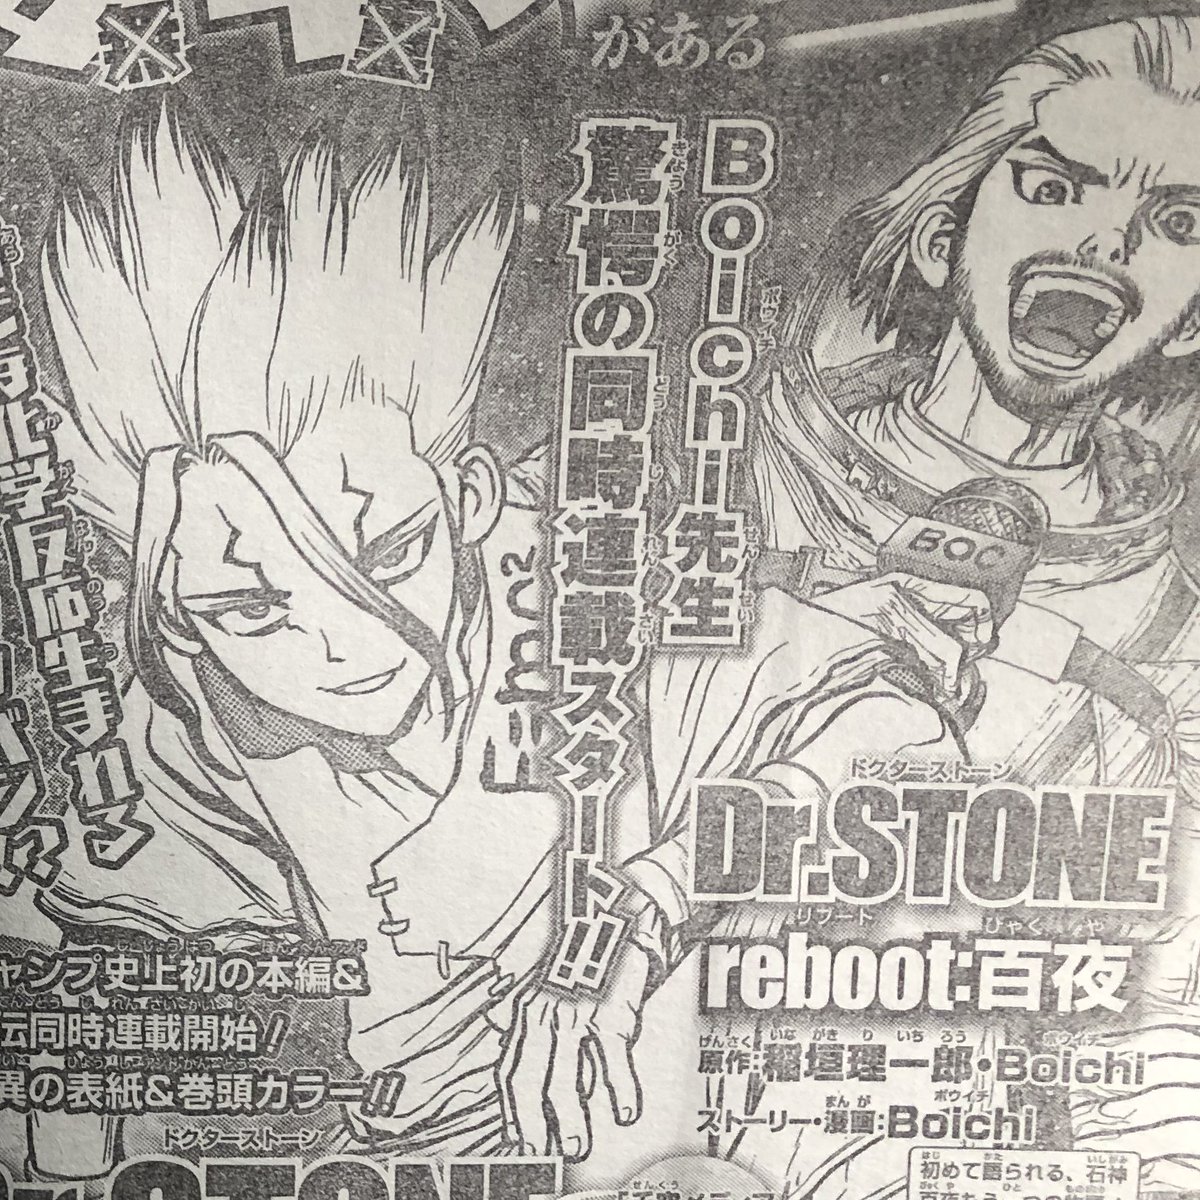 Weekly Shonen Jump Dr Stone Reboot Byakuya Will Not Be A One Chapter Side Story But A Spin Off Series That Will Start Being Serialized From Issue 48 Onwards Boichi Will